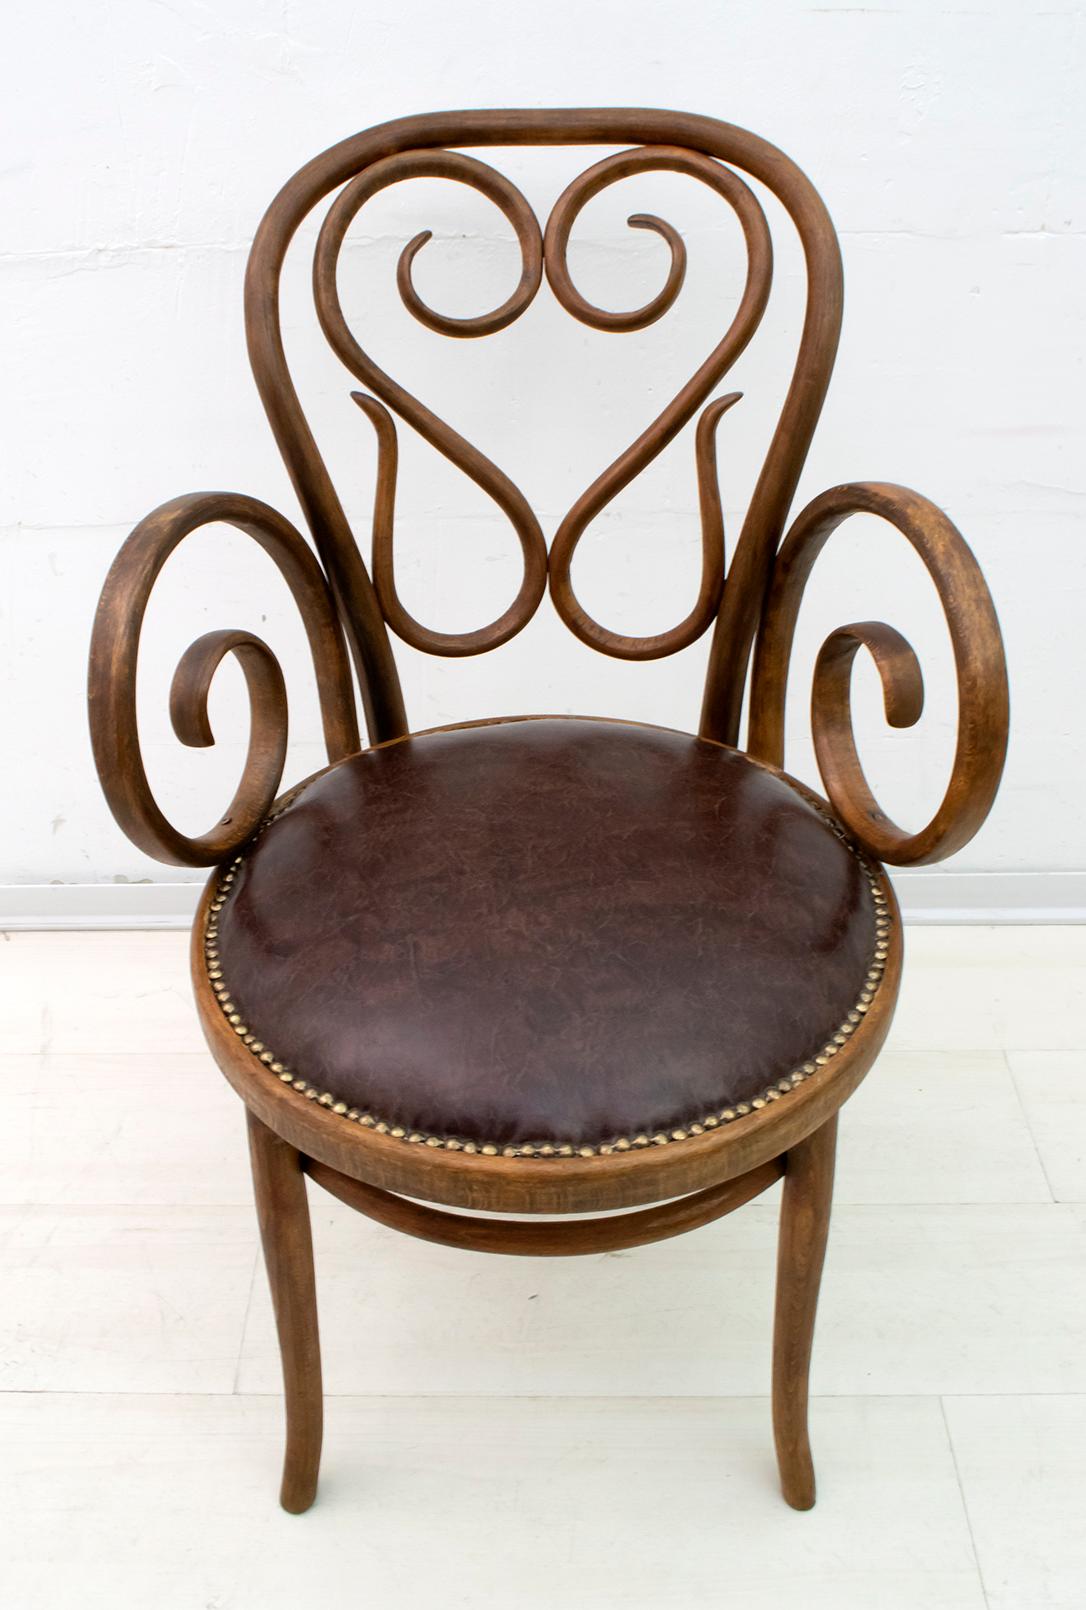 This chair was created by Michael Thonet for Thonet in 1890. Produced in curved beech. It has been recently restored and has a new eco-leather covering.